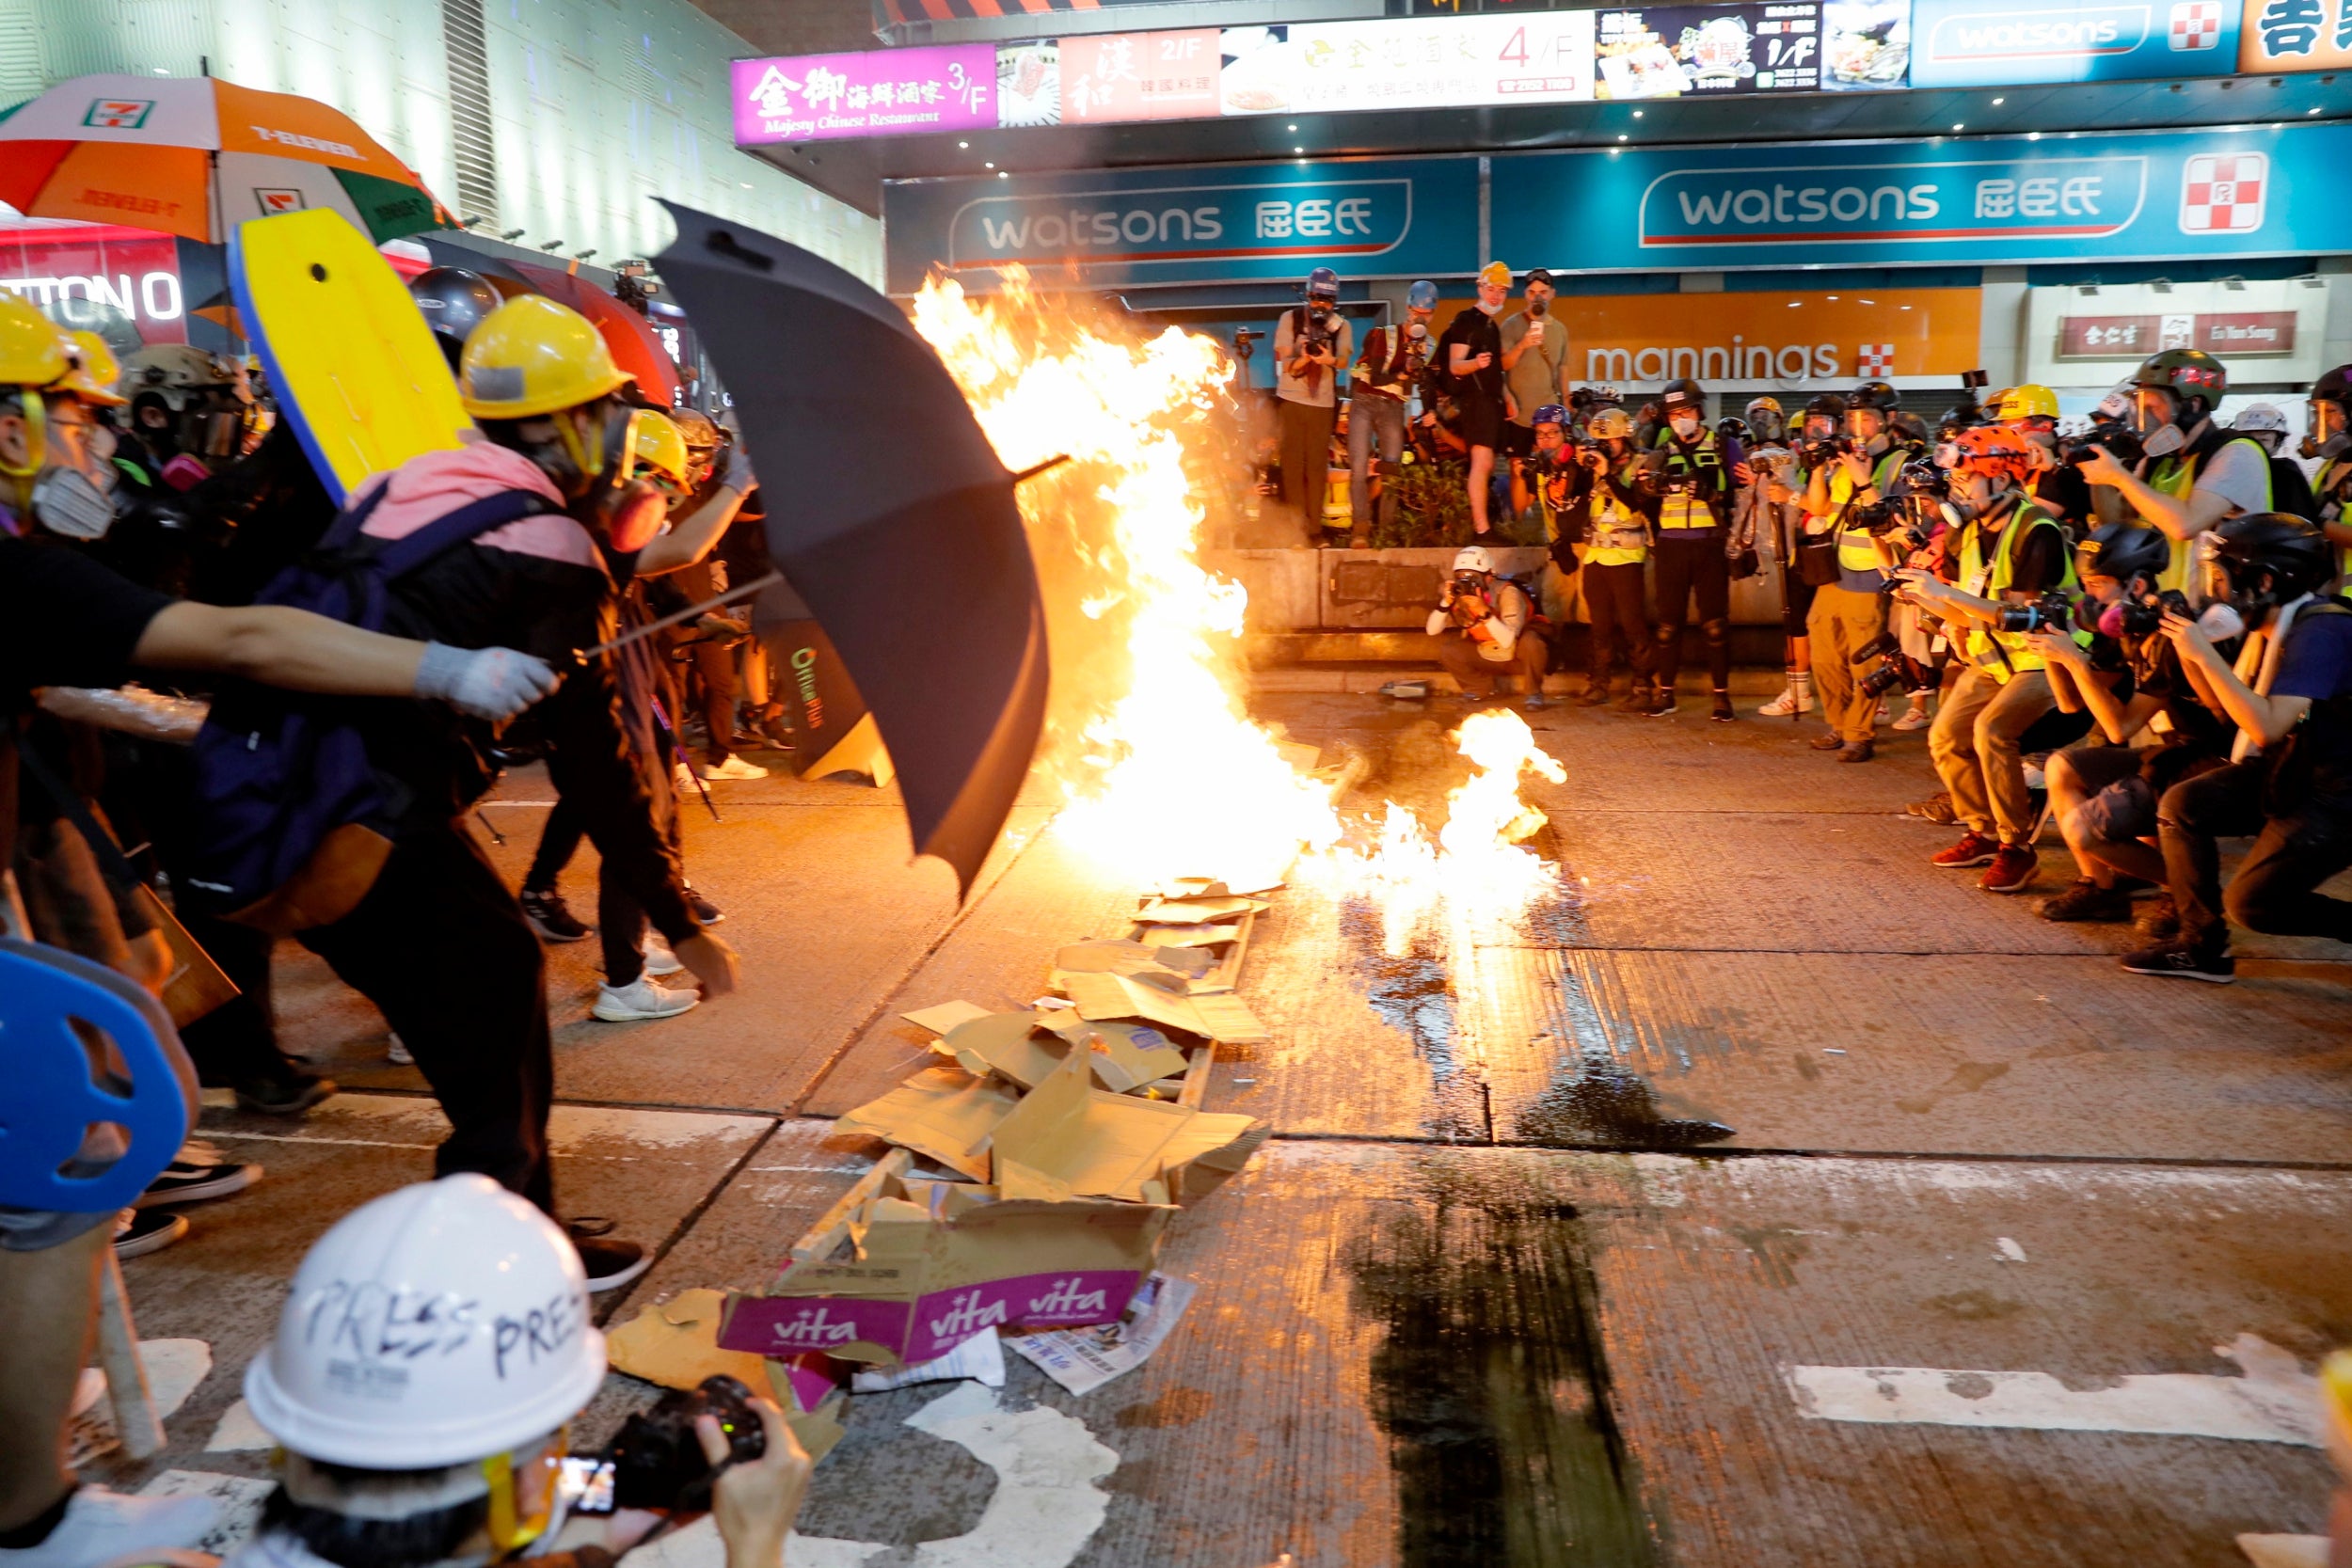 Hong Kong protesters, police face off ahead of city-wide strike